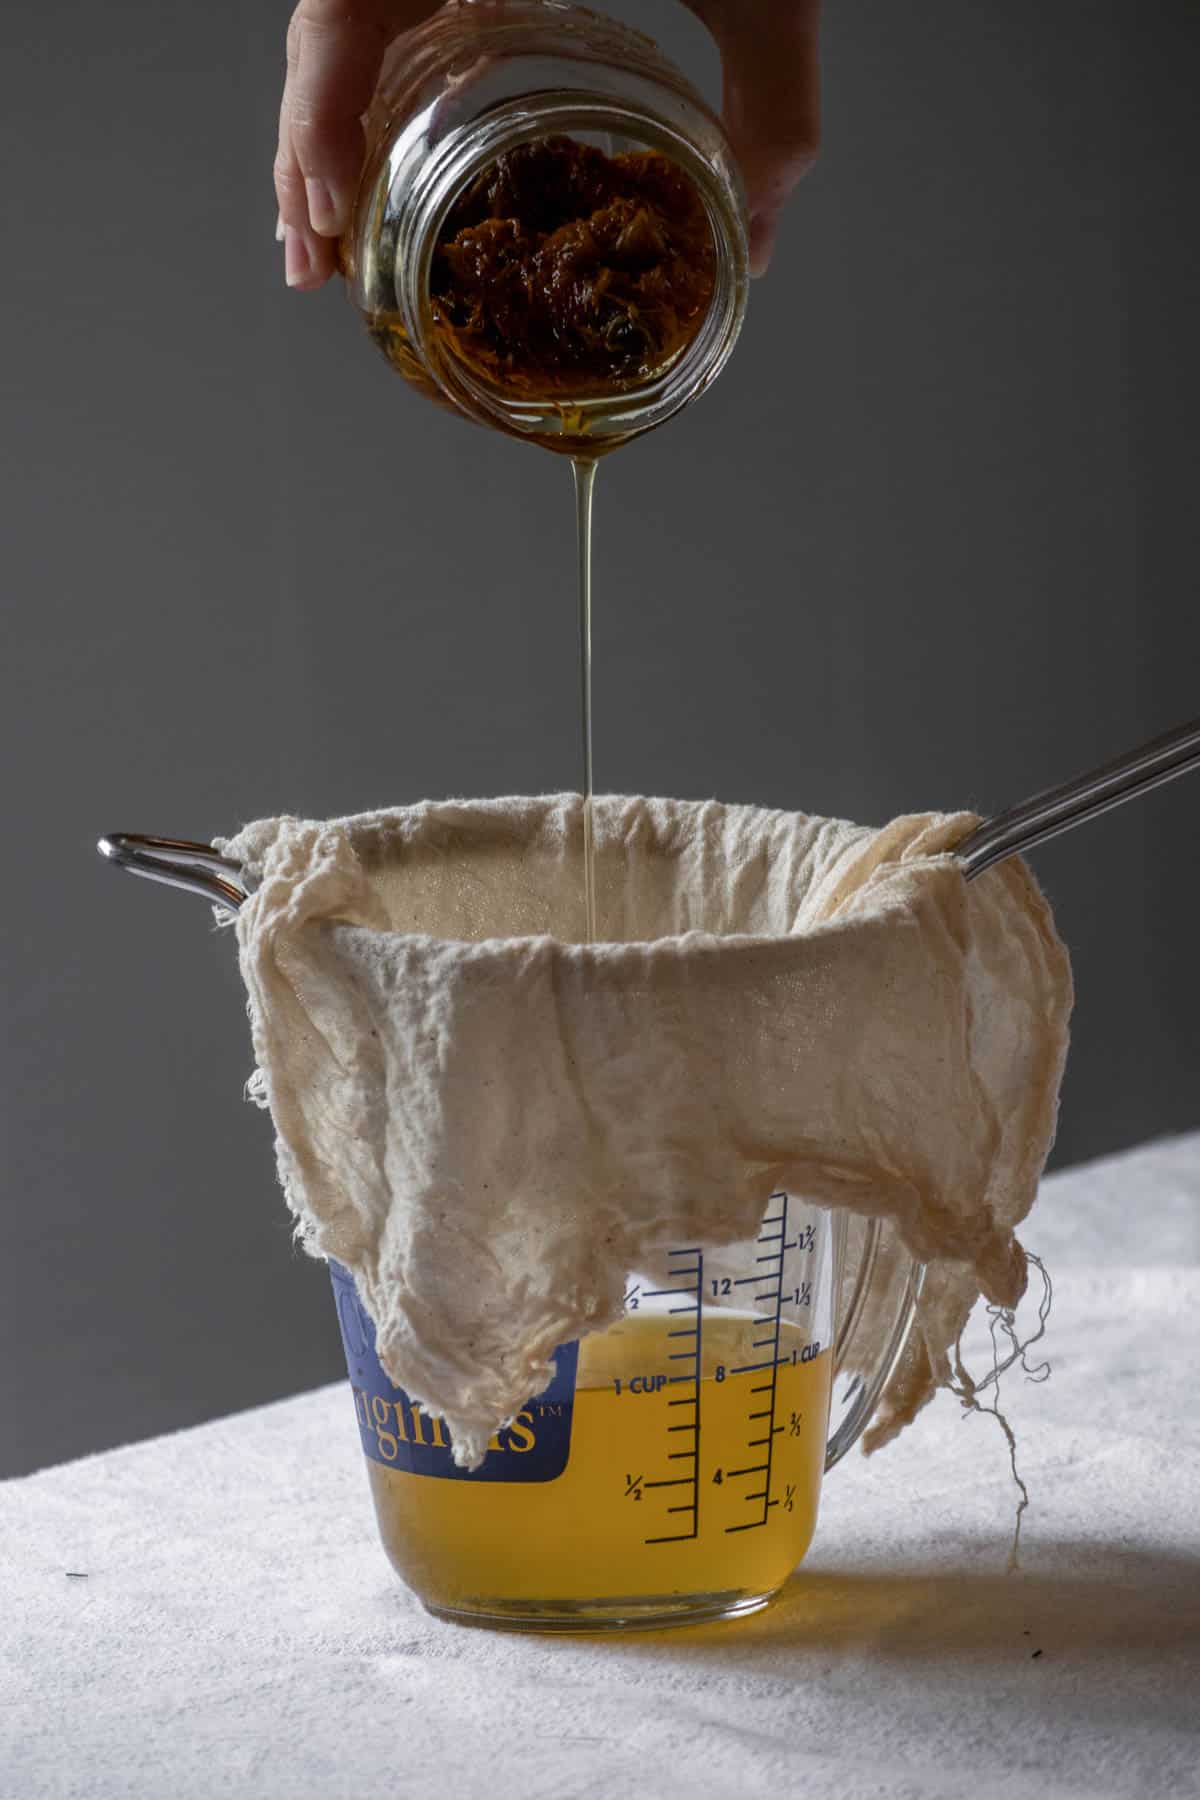 Infused calendula oil being strained through a cheesecloth